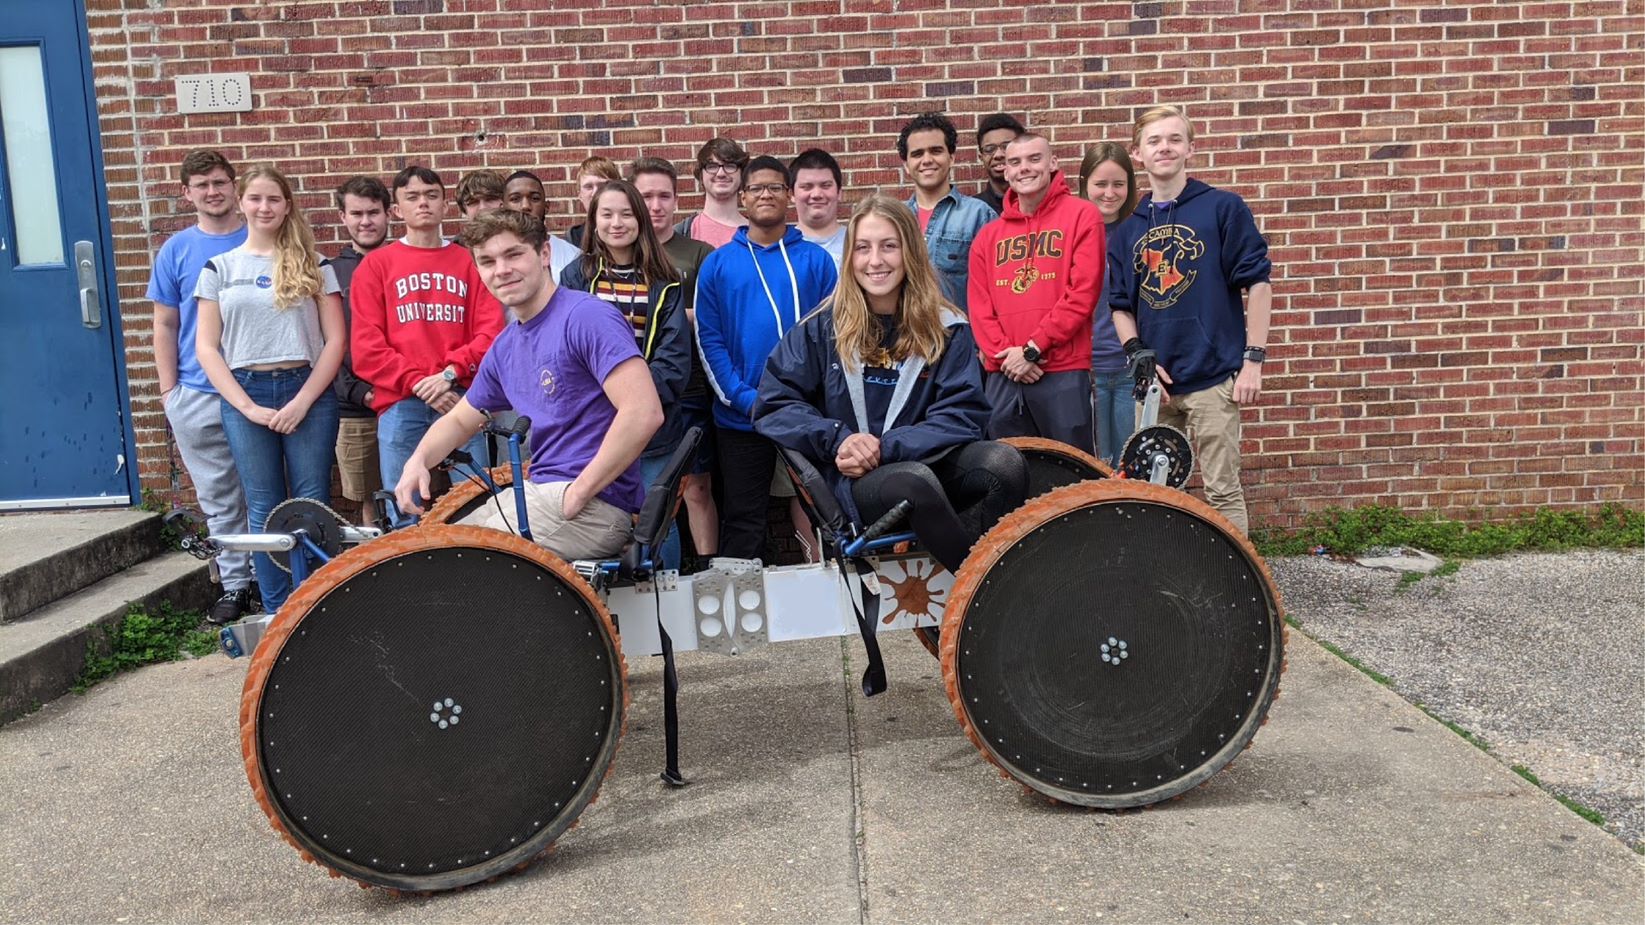 The Human Exploration Rover Challenge team from Escambia High School in Pensacola, Florida, won the high school division.